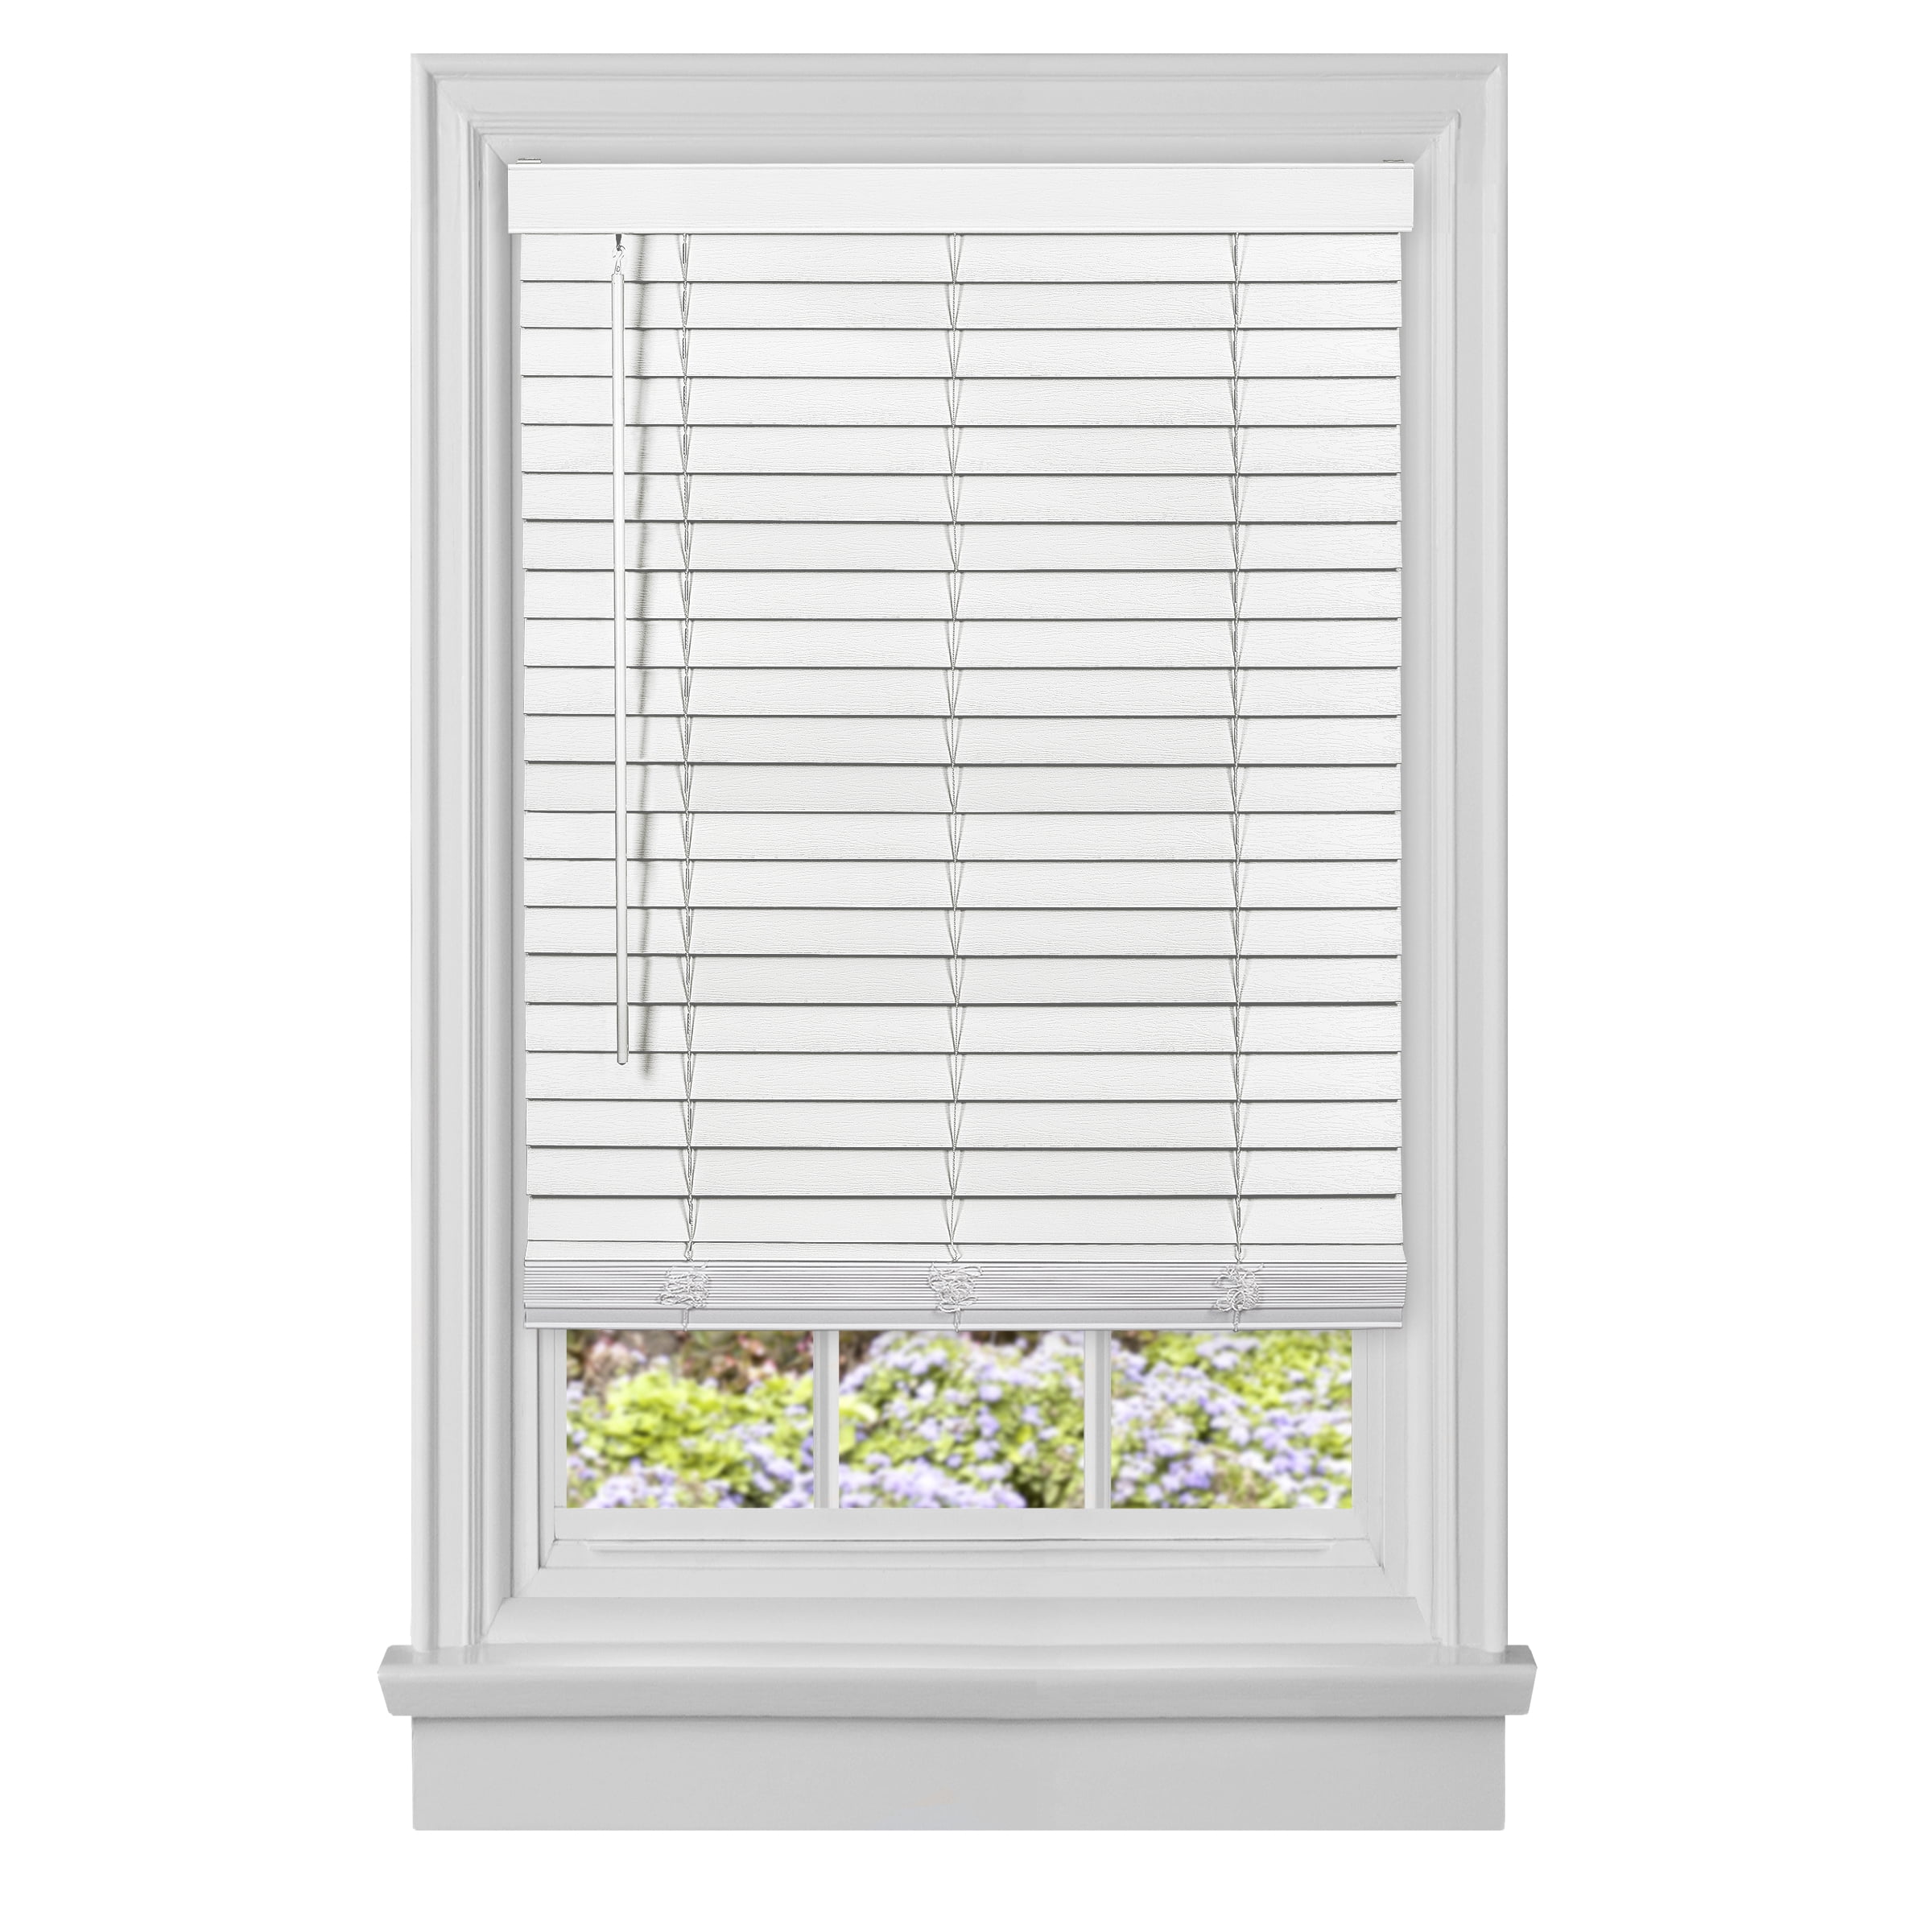 Picture of Achim MFG230WH02 30 x 64 in. Cordless GII Madera Falsa 2 in. Faux Wood Plantation Blind - White